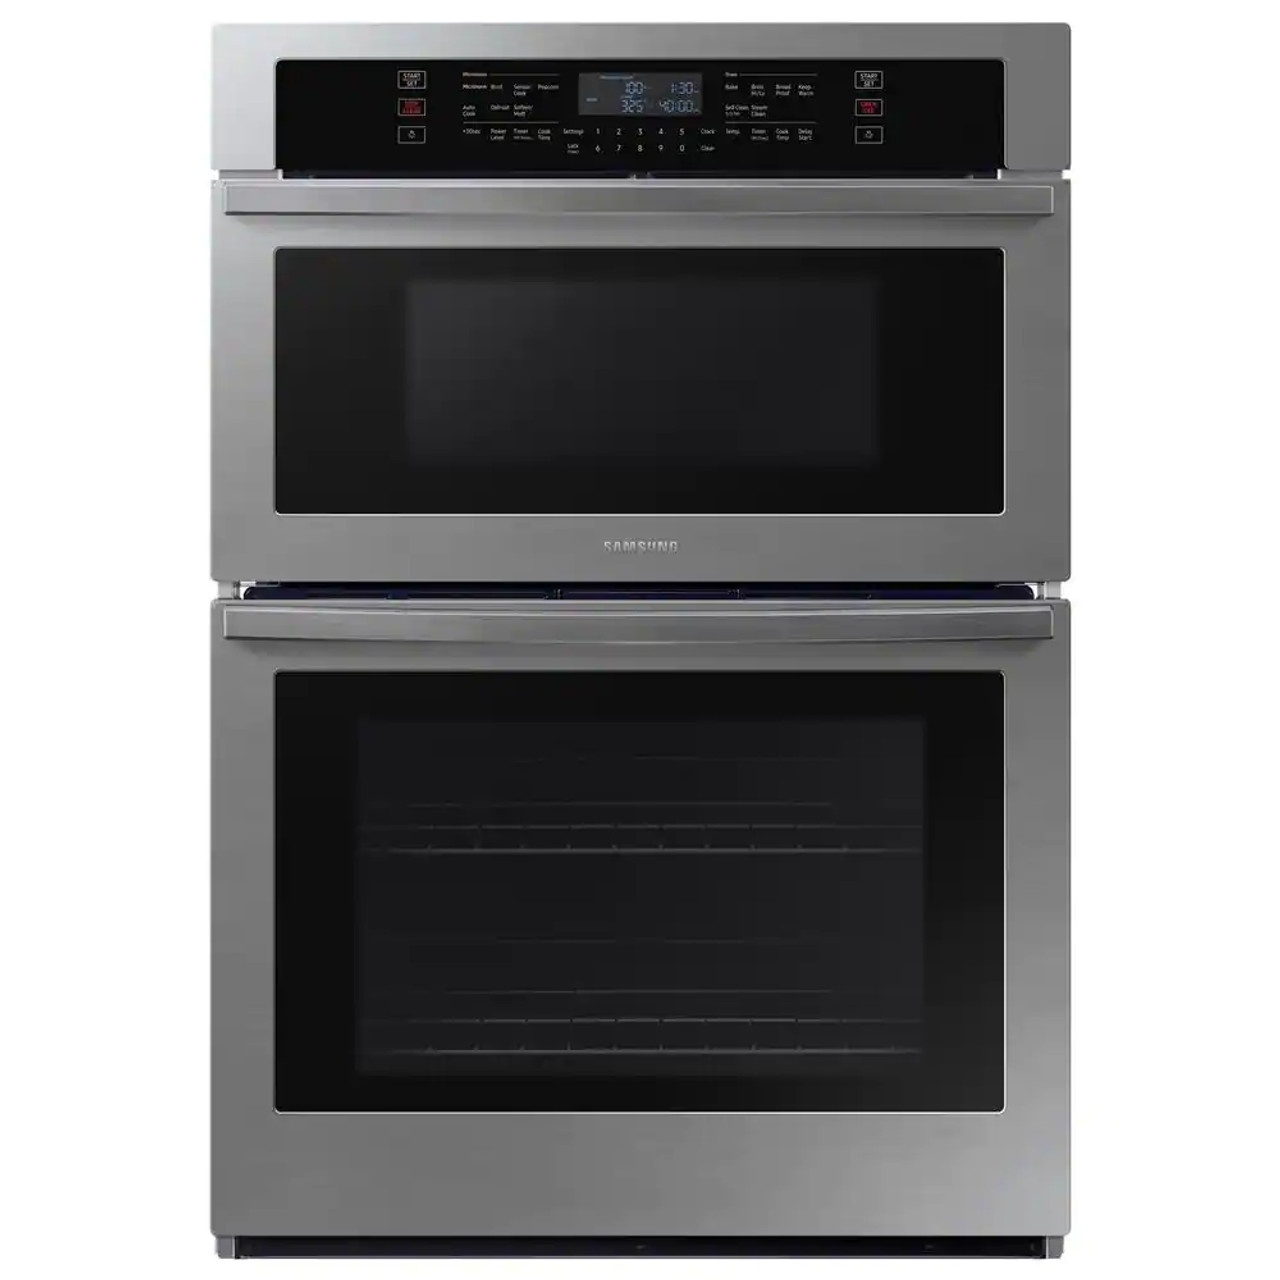 Samsung 30" Combination Wall Oven |Scratch and Dent|